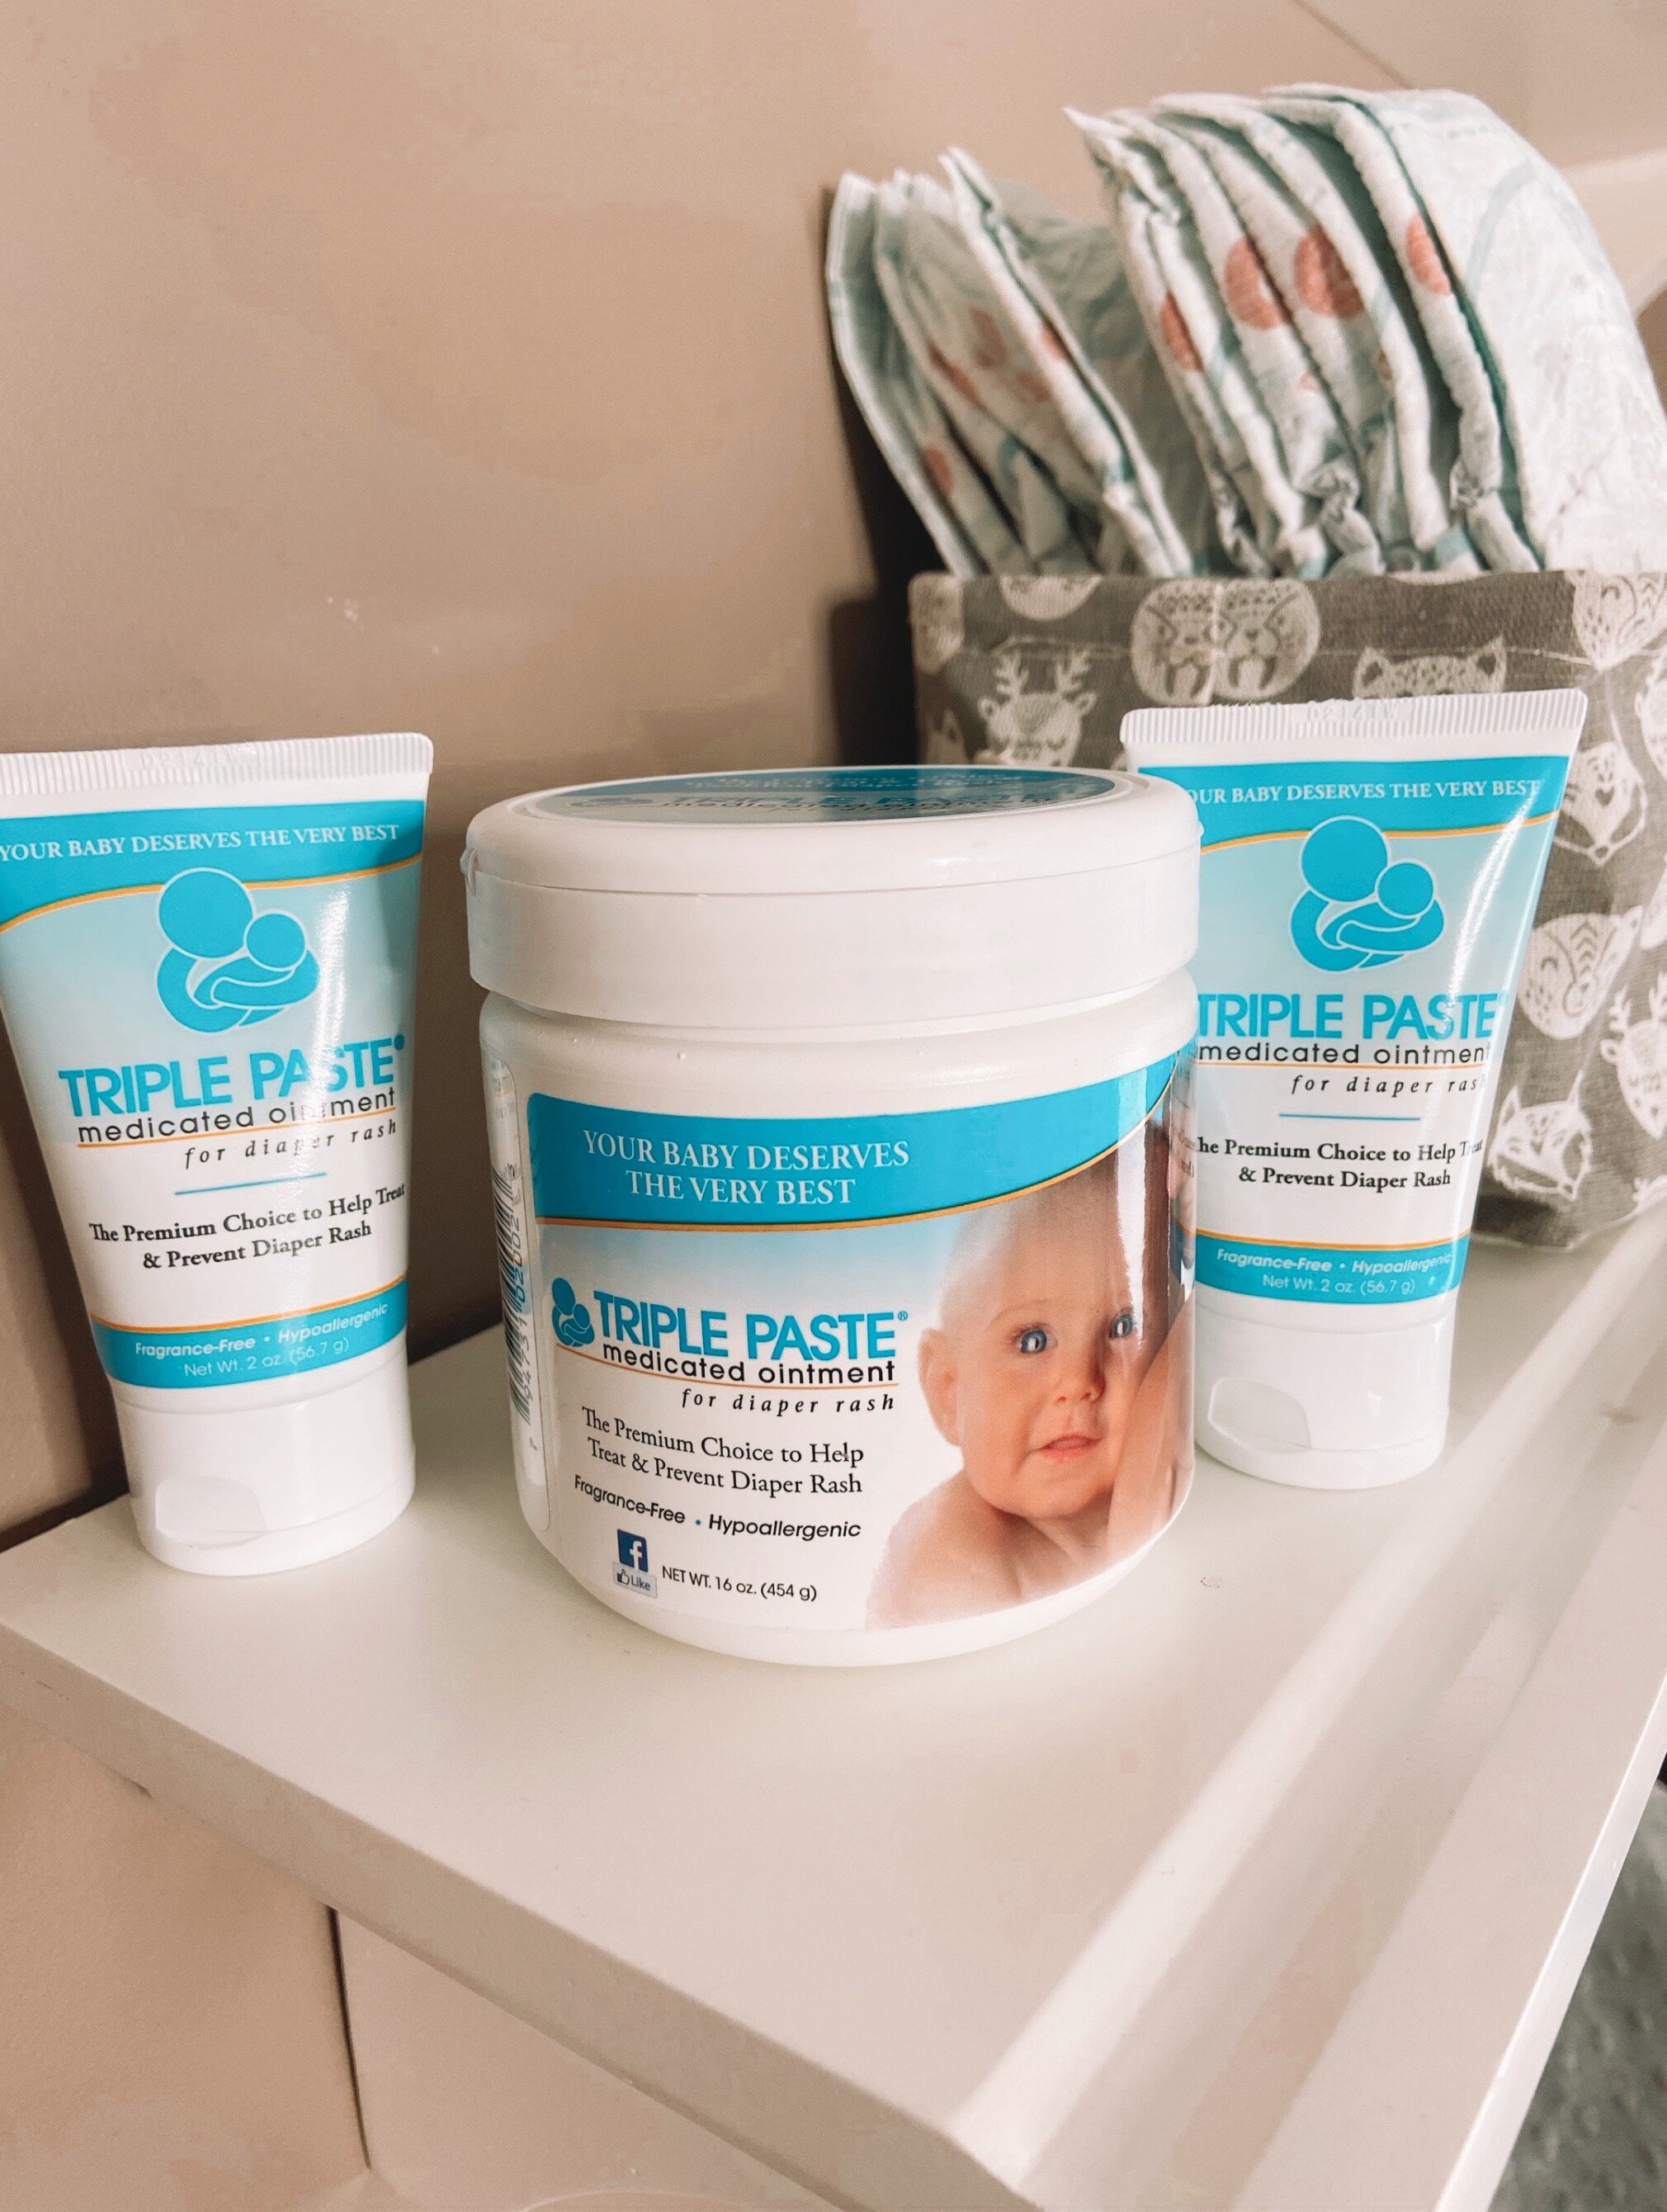 Triple Paste Diaper Rash Cream for Baby - 16 Oz Tub - Zinc Oxide Ointment  Treats, Soothes and Prevents Diaper Rash - Pediatrician-Recommended